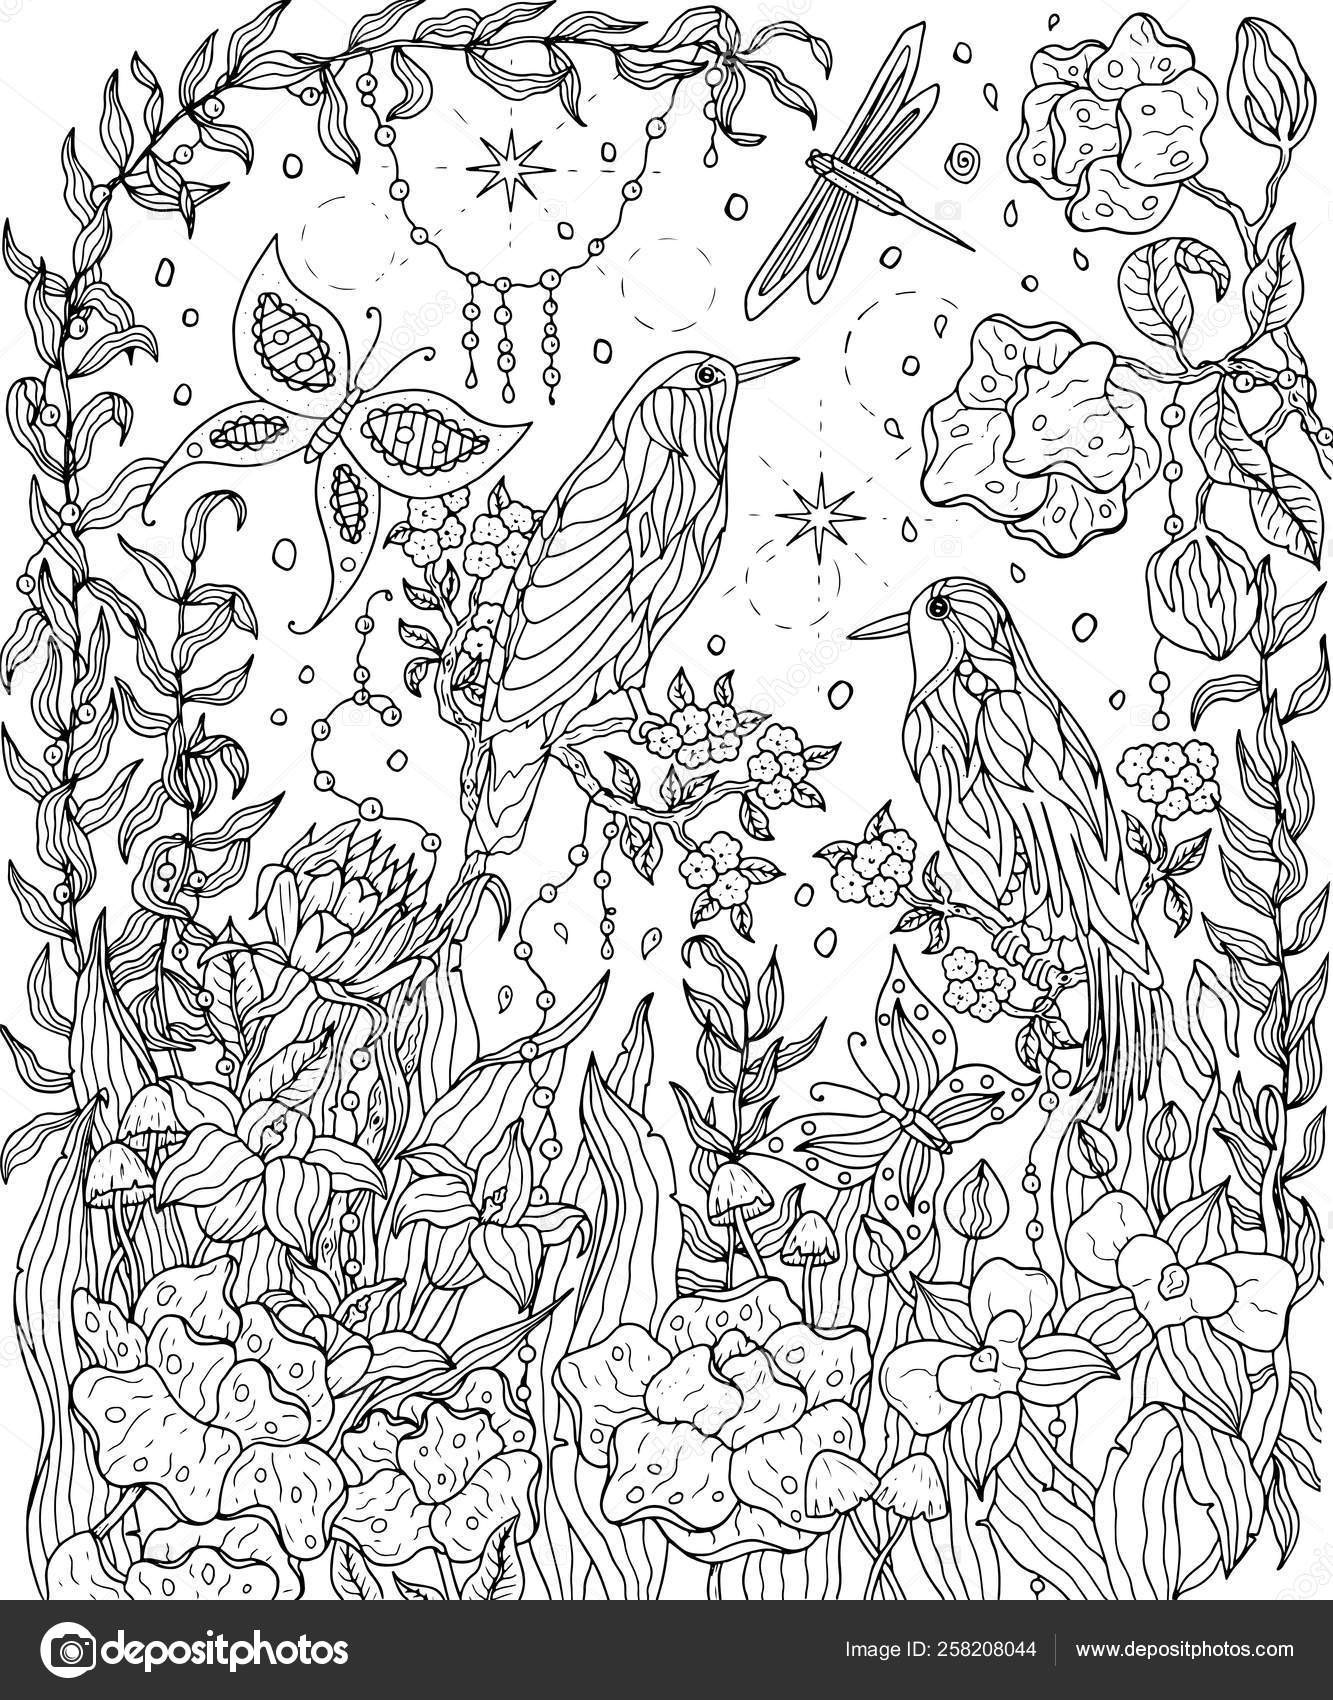 Birds and flowers coloring page. Birds of paradise vector illust ...